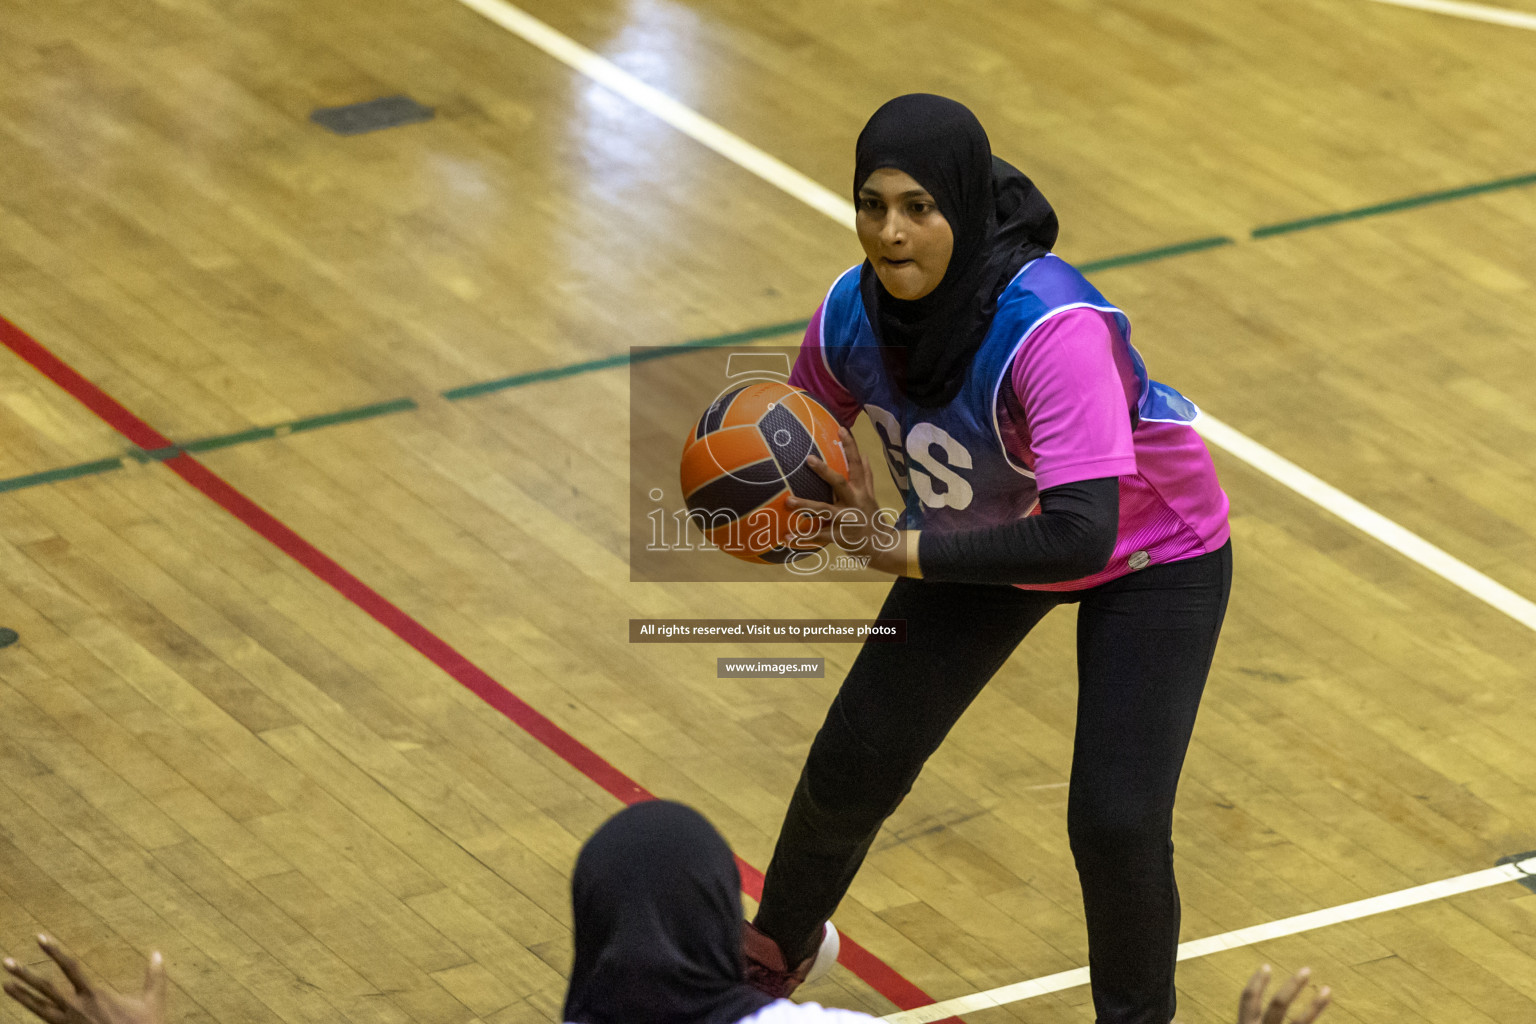 Sports Club Shining Star vs Club Green Streets in the Milo National Netball Tournament 2022 on 17 July 2022, held in Social Center, Male', Maldives. Photographer: Hassan Simah / Images.mv